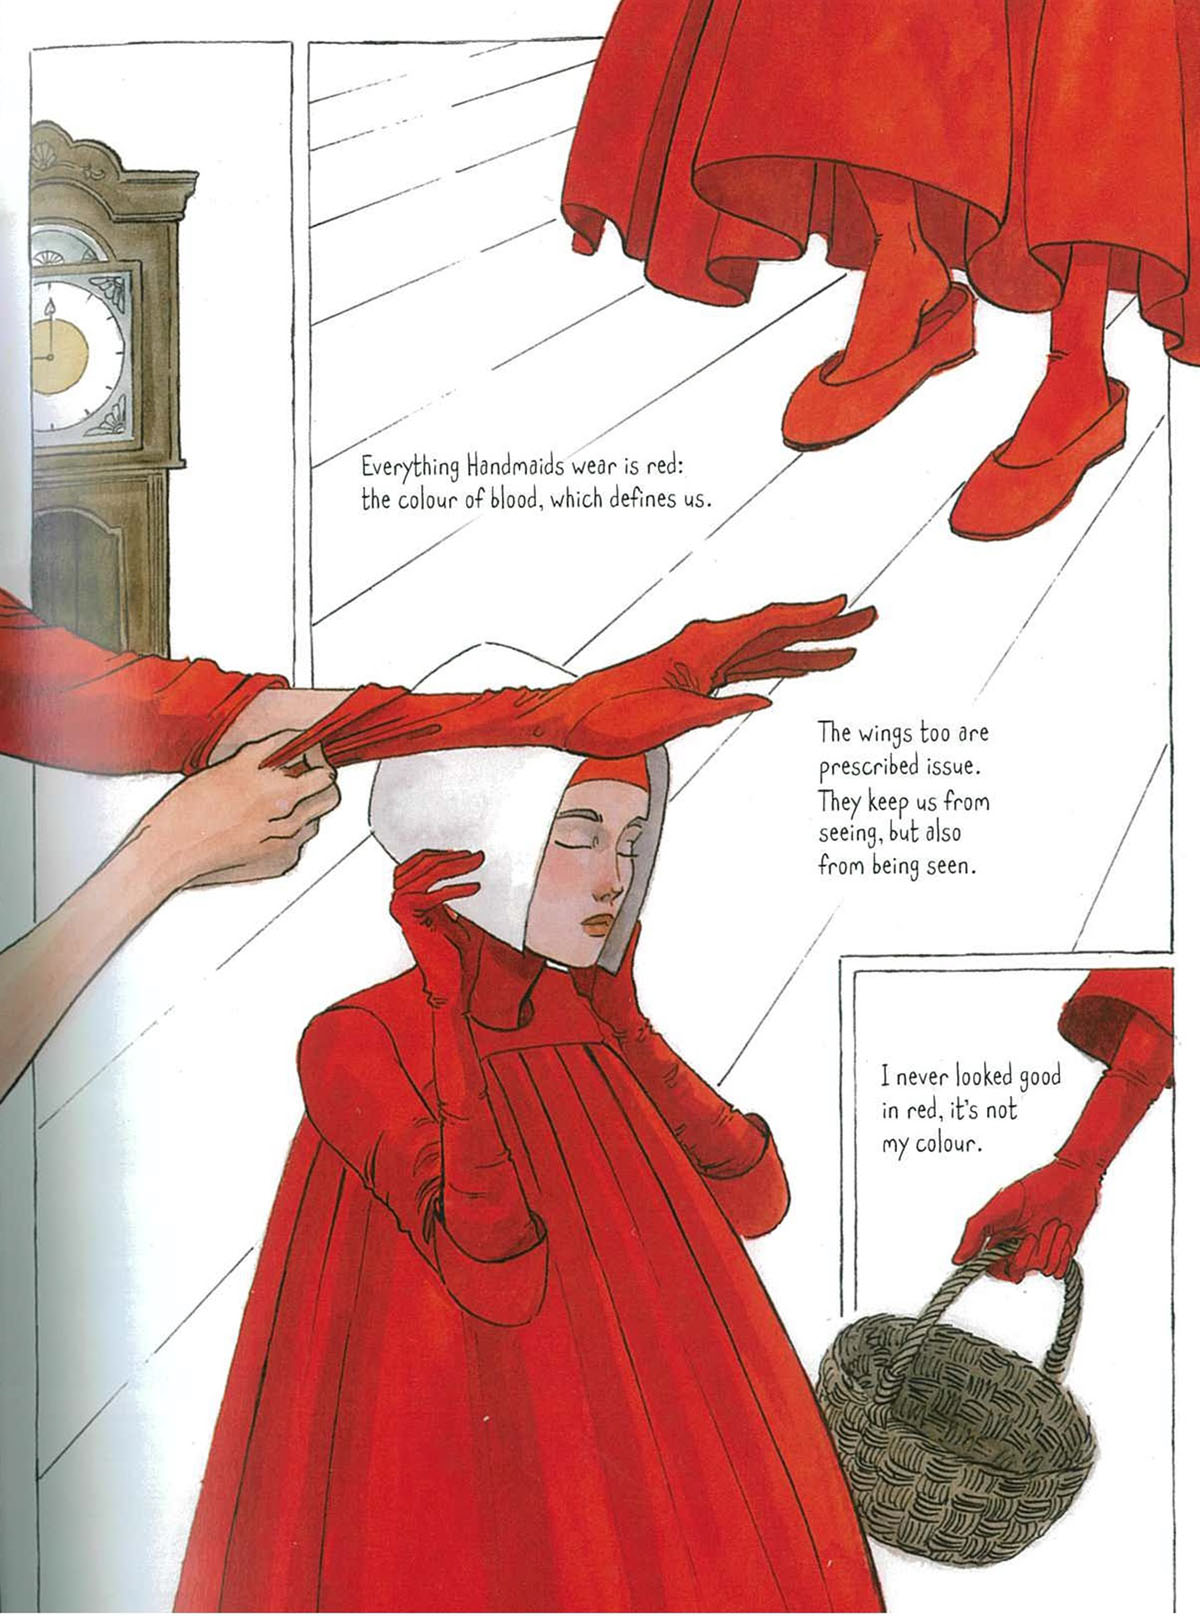 Composing the Handmaid: From Graphic Novel to Protest Icon